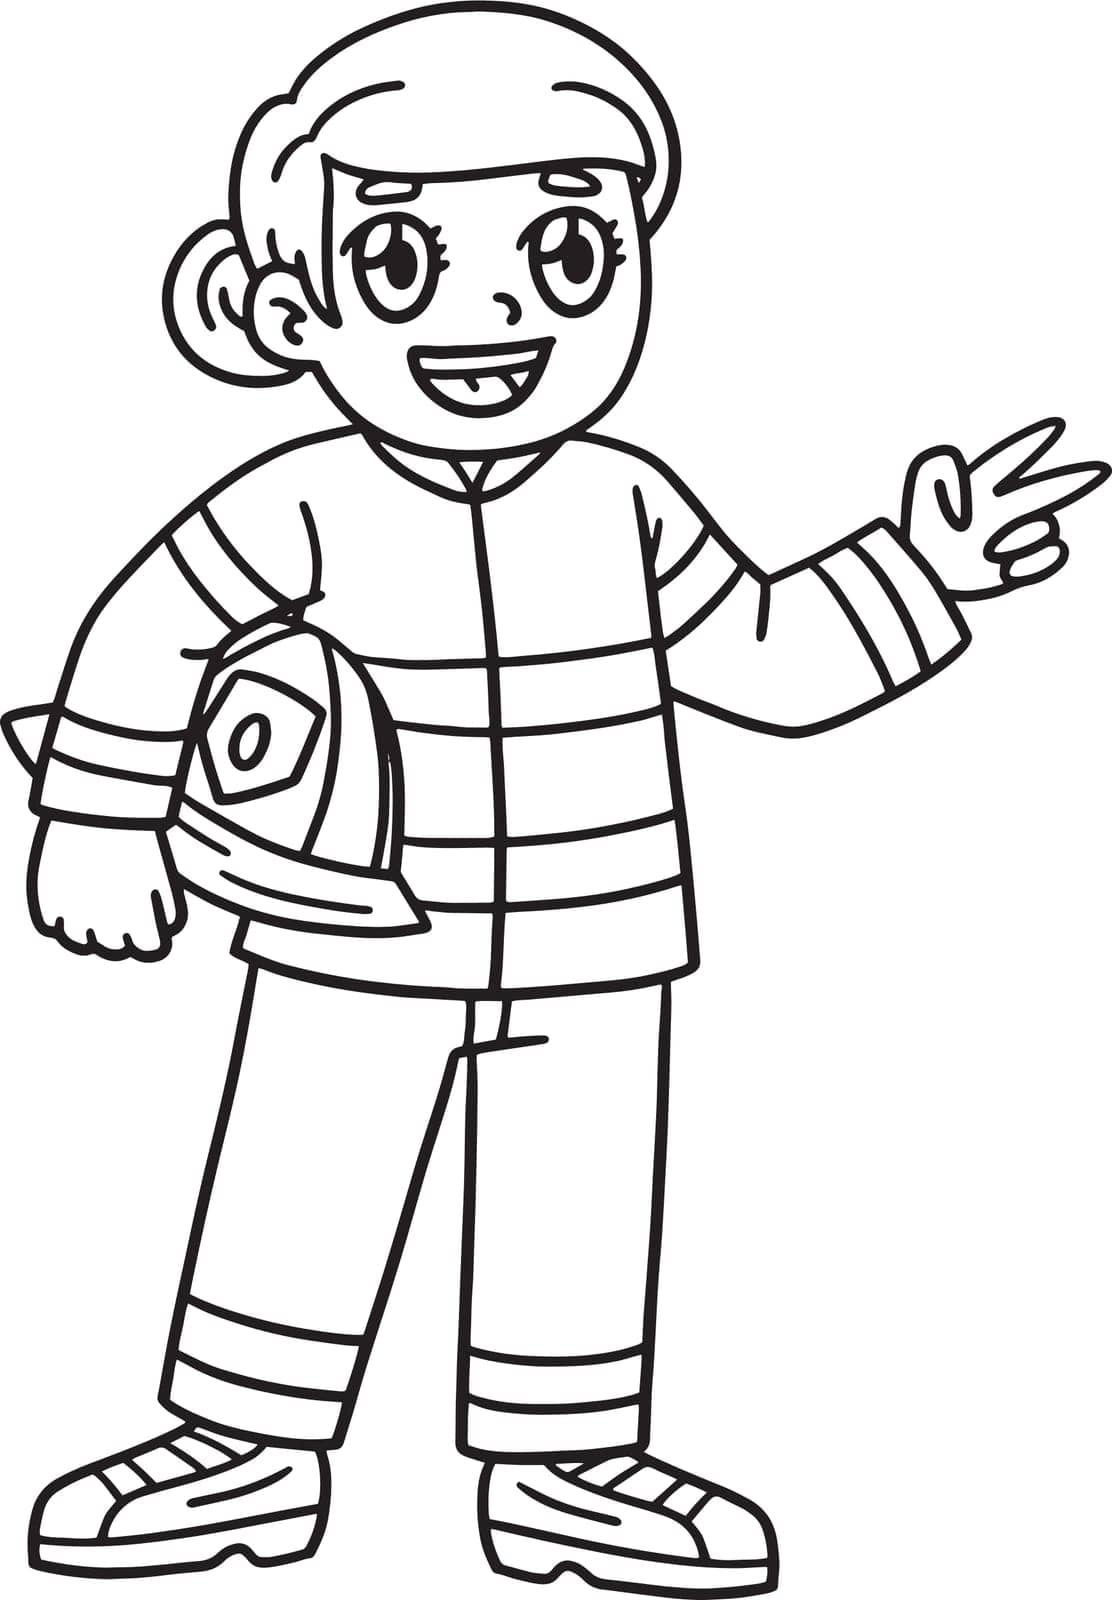 Firefighter Woman Isolated Coloring Page for Kids by abbydesign